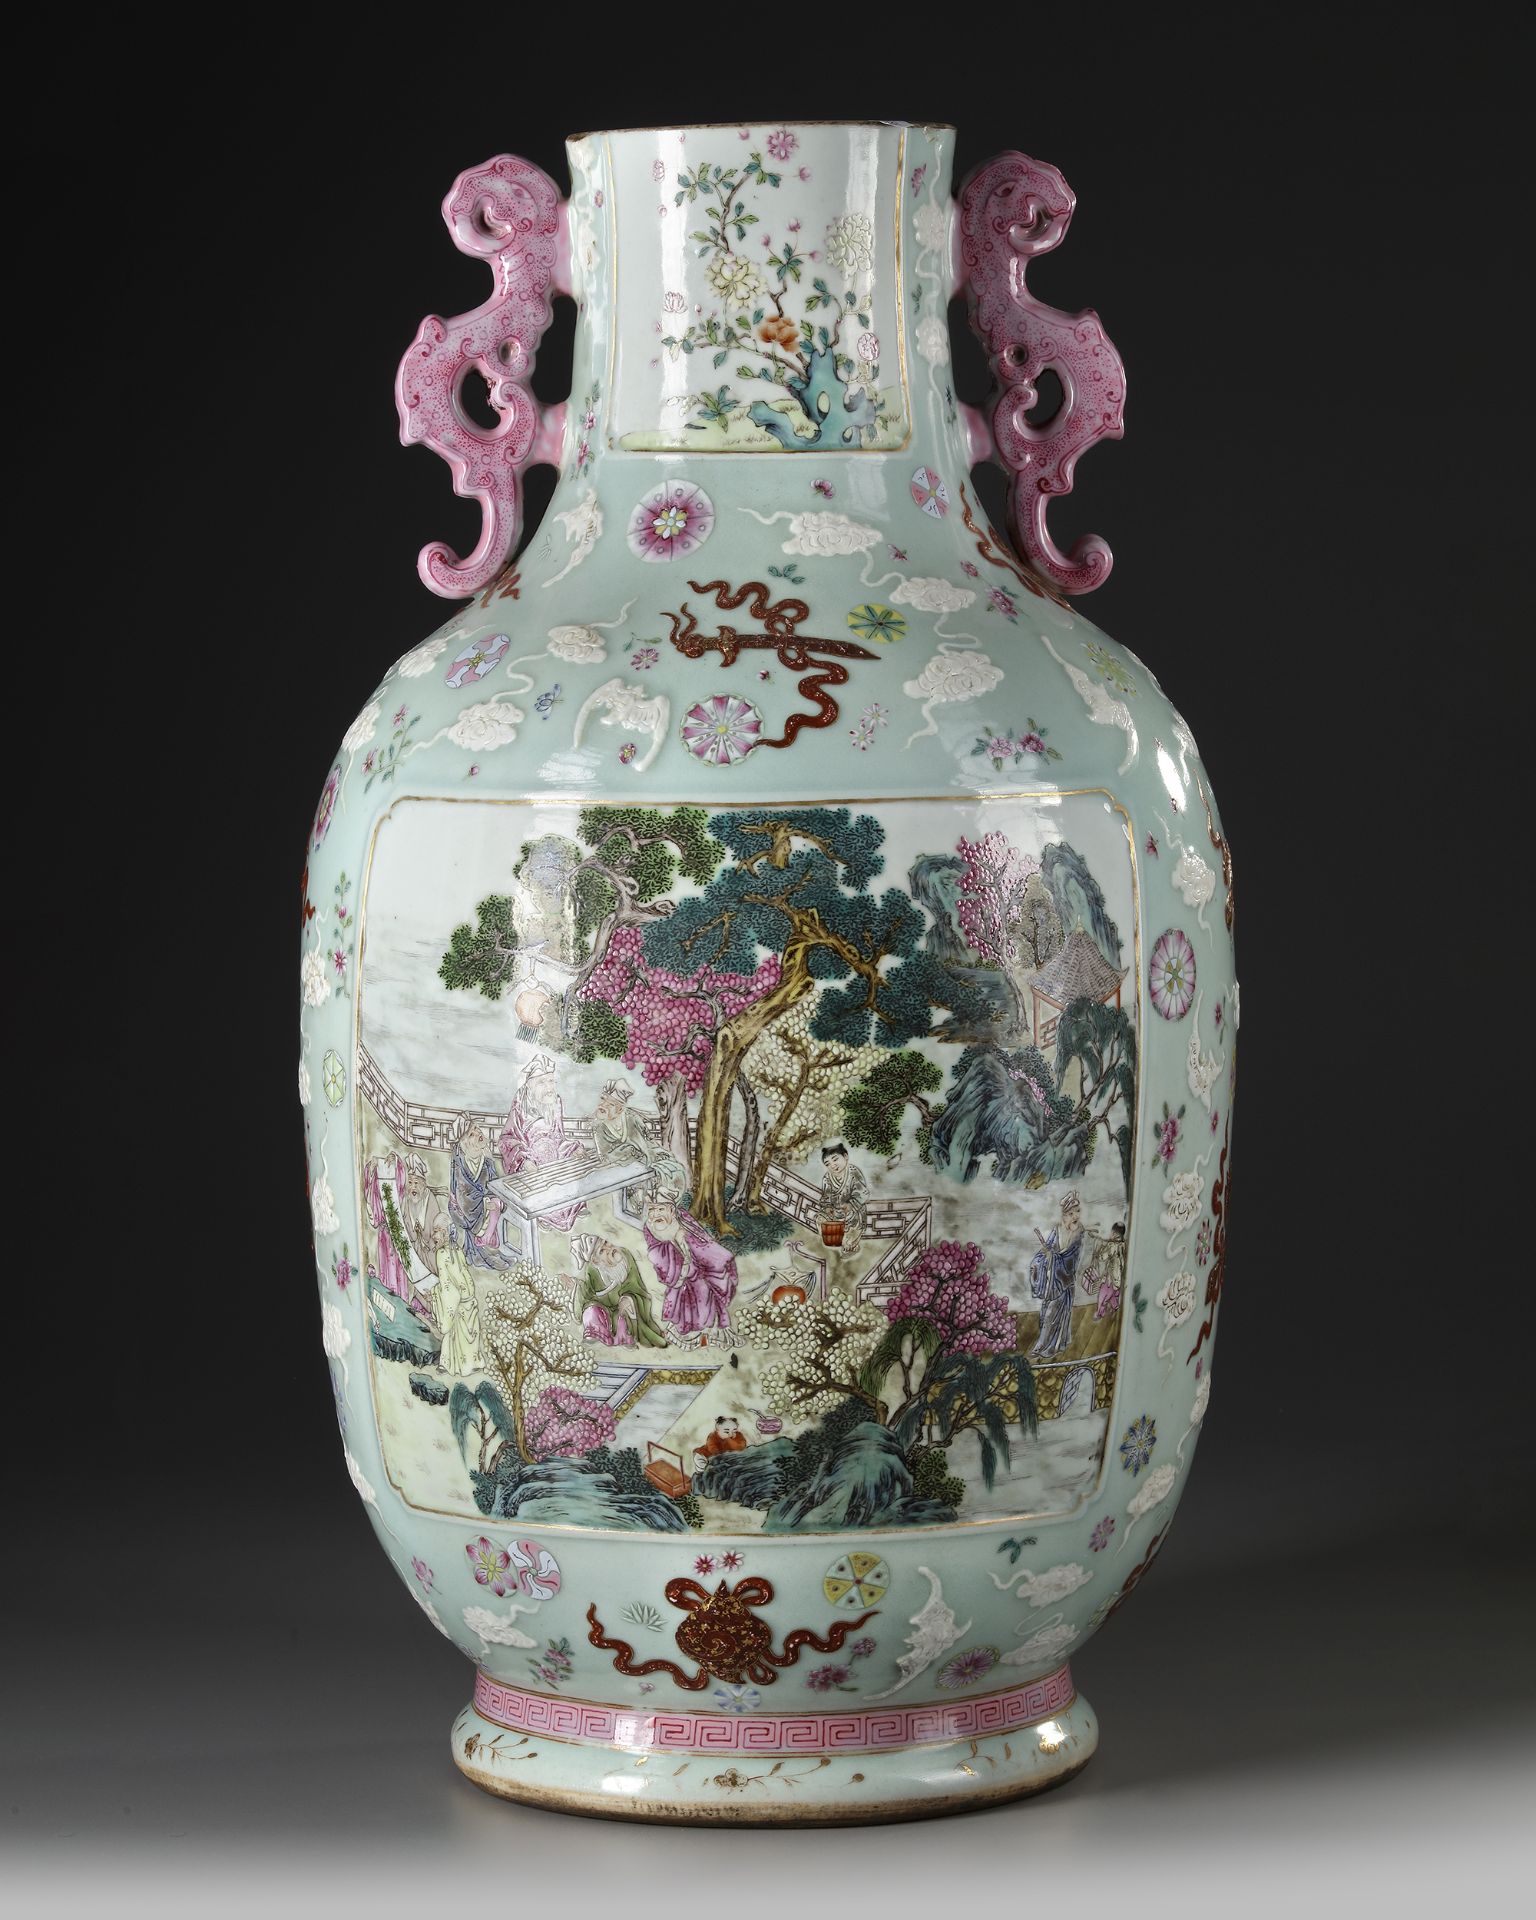 A LARGE CHINESE FAMILLE ROSE VASE, 19TH CENTURY